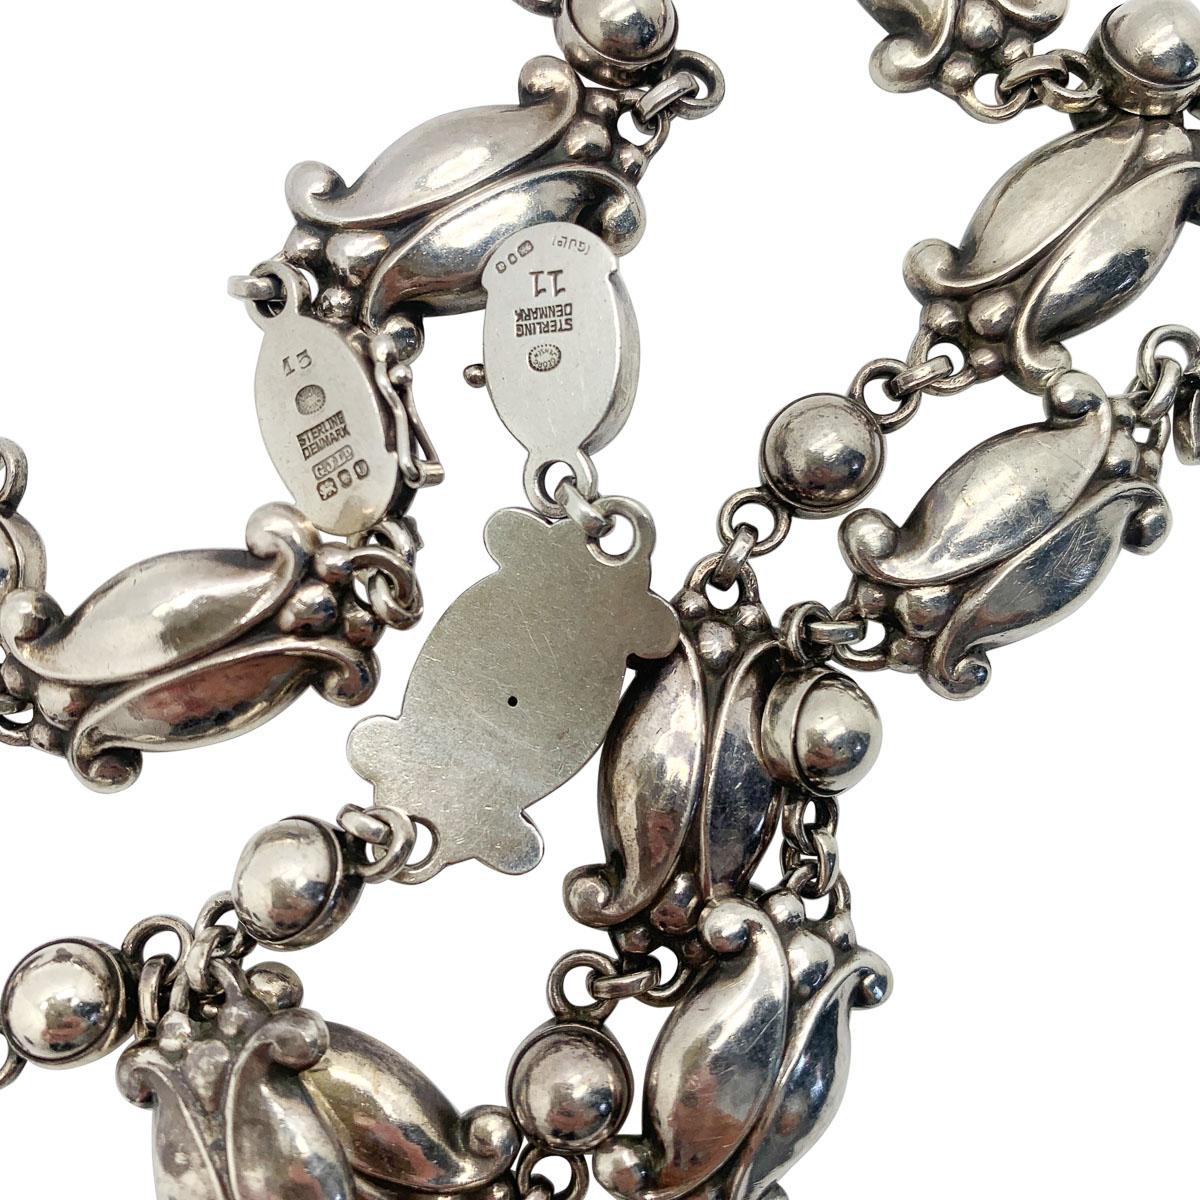 An eternally graceful 1950s sterling silver vintage Georg Jensen necklace and bracelet in the hugely coveted Moonlight Blossom design. 
Danish silversmith, Georg Jensen originally produced this design in 1905 inspired by elements of nature. This